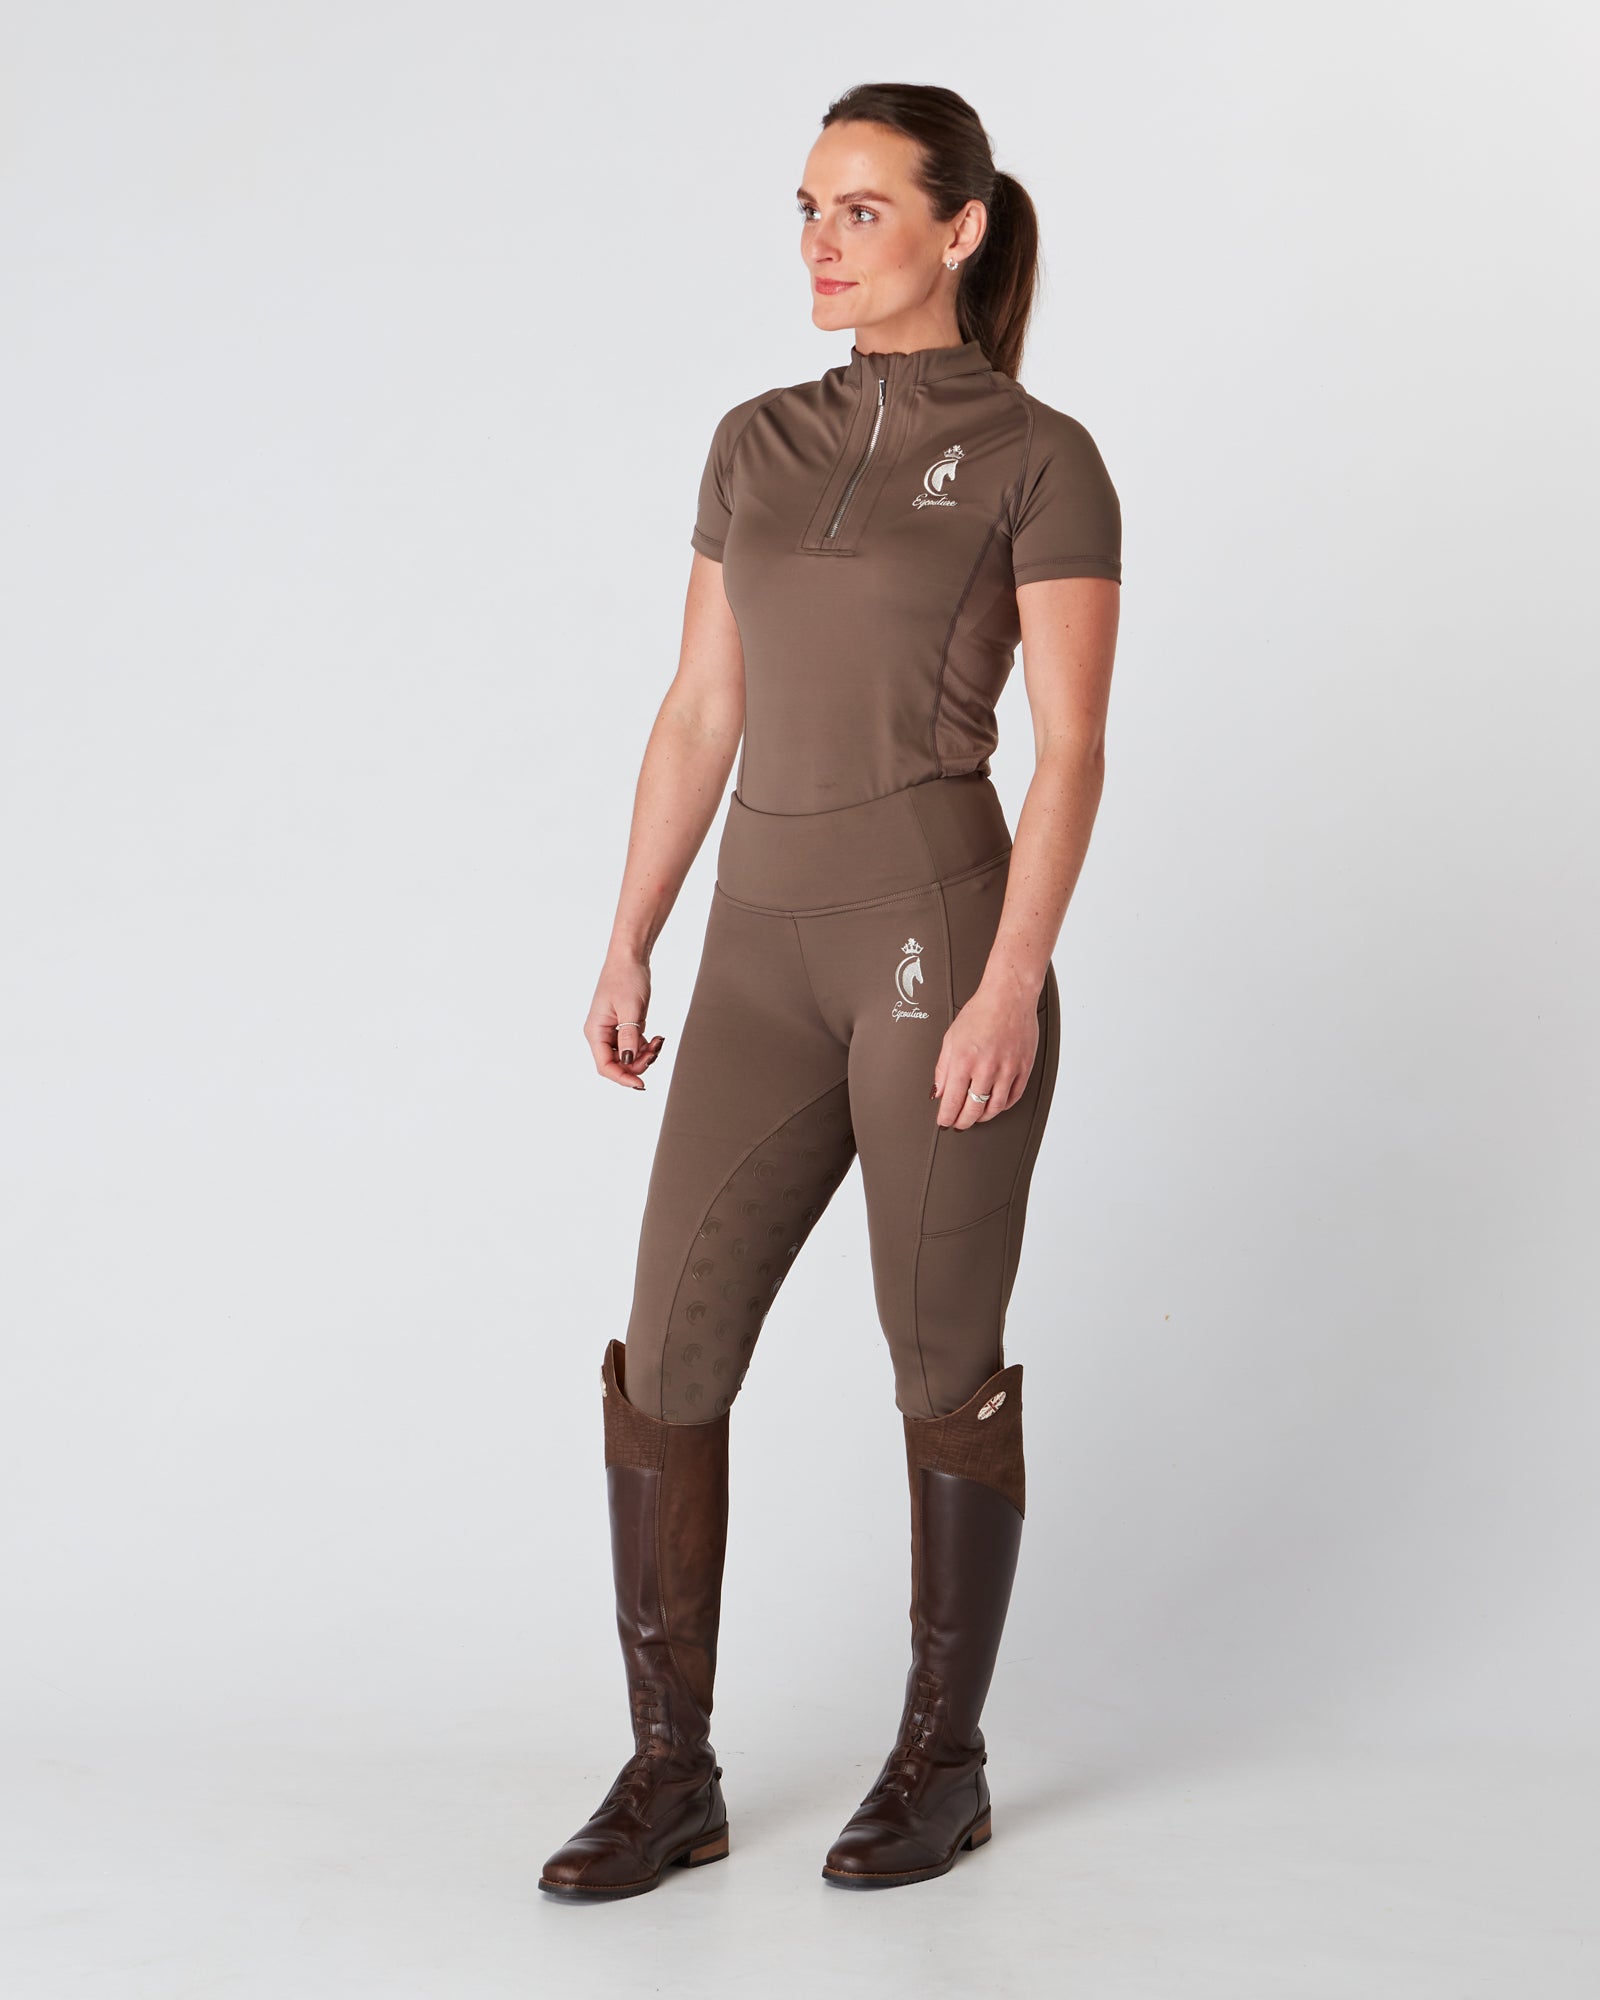 Equestrian brown short sleeve riding top/base layer. Brown riding leggings/tights. 